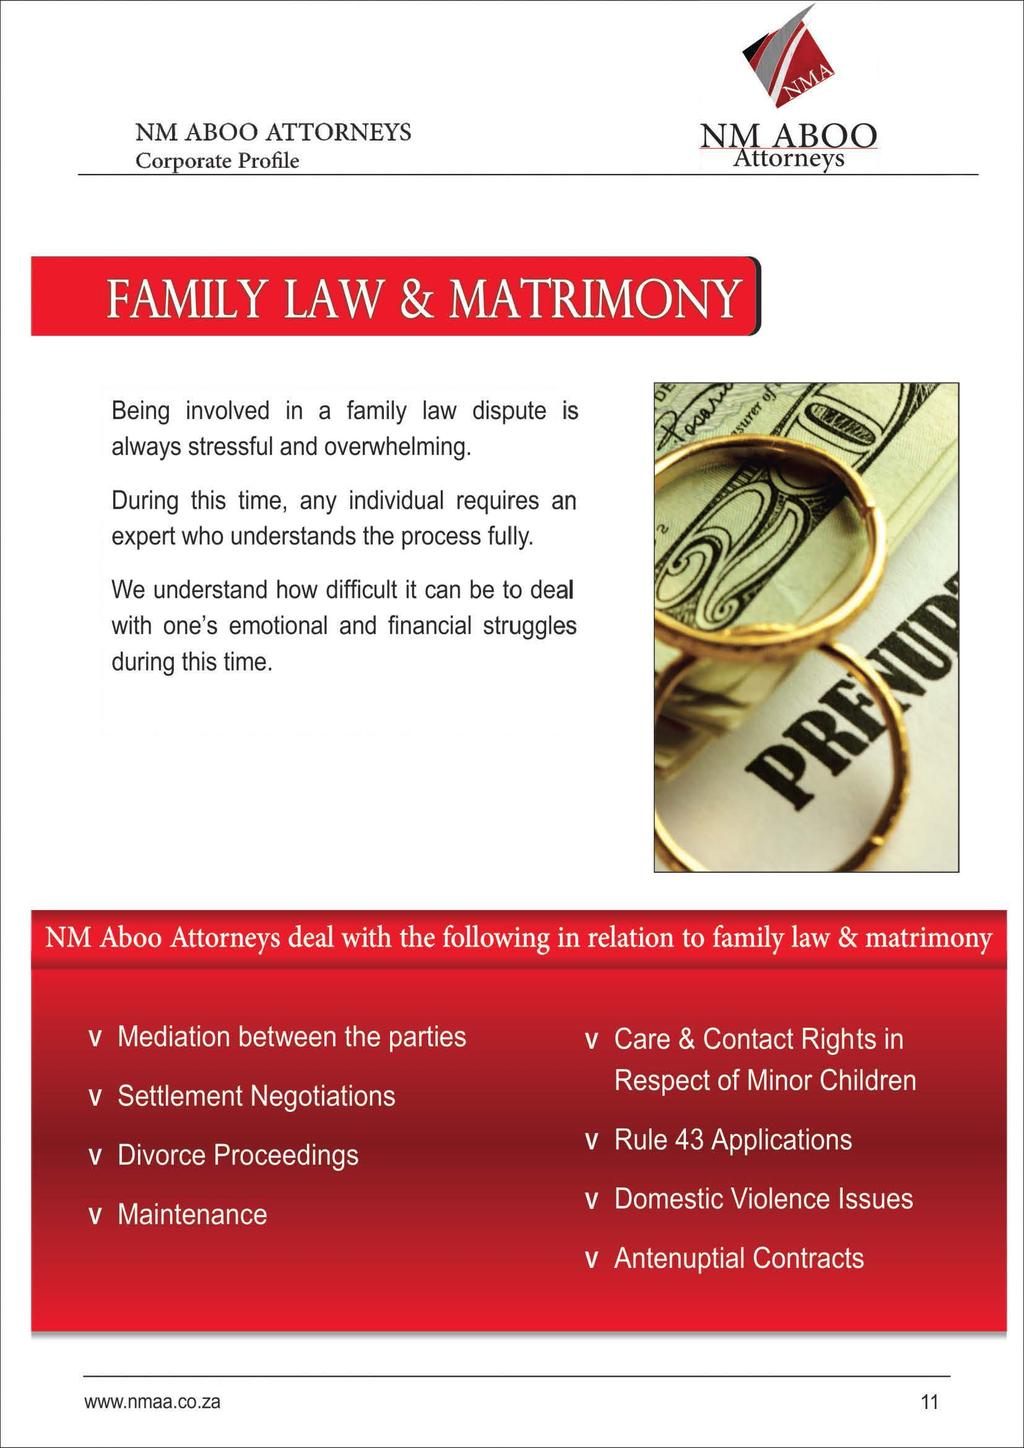 FAMILY LAW & MATRIMONY Being involved in a family law dispute is always stressful and overwhelming. During this time, any individual requires an expert who understands the process fully.